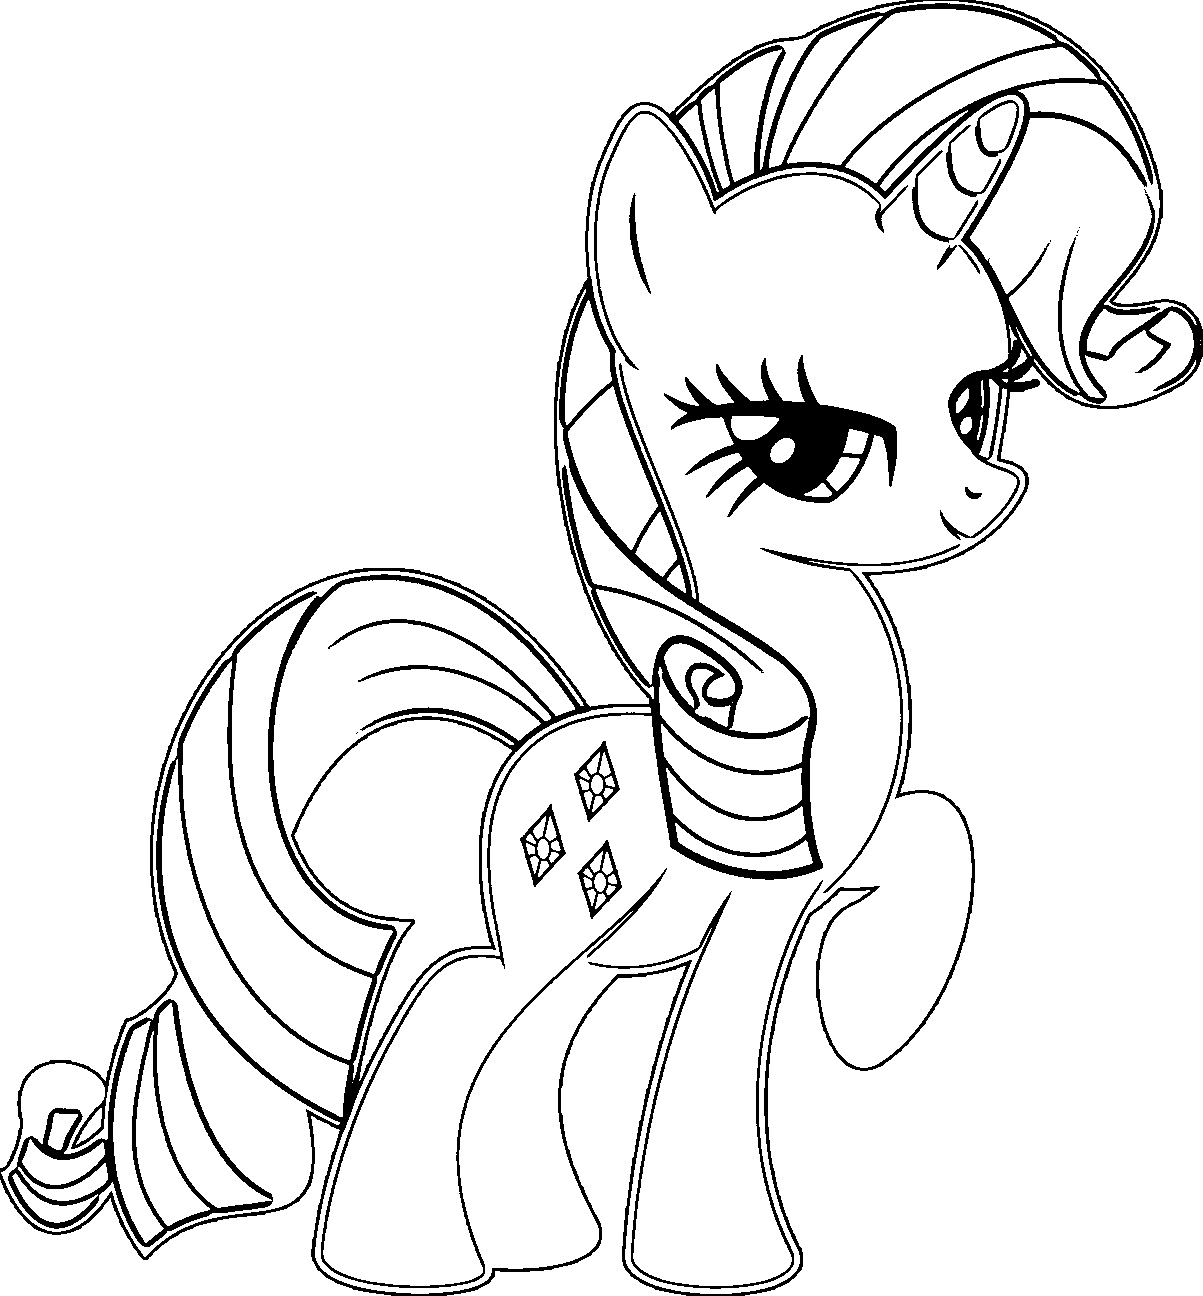 Rarity Coloring Pages - Best Coloring Pages For Kids